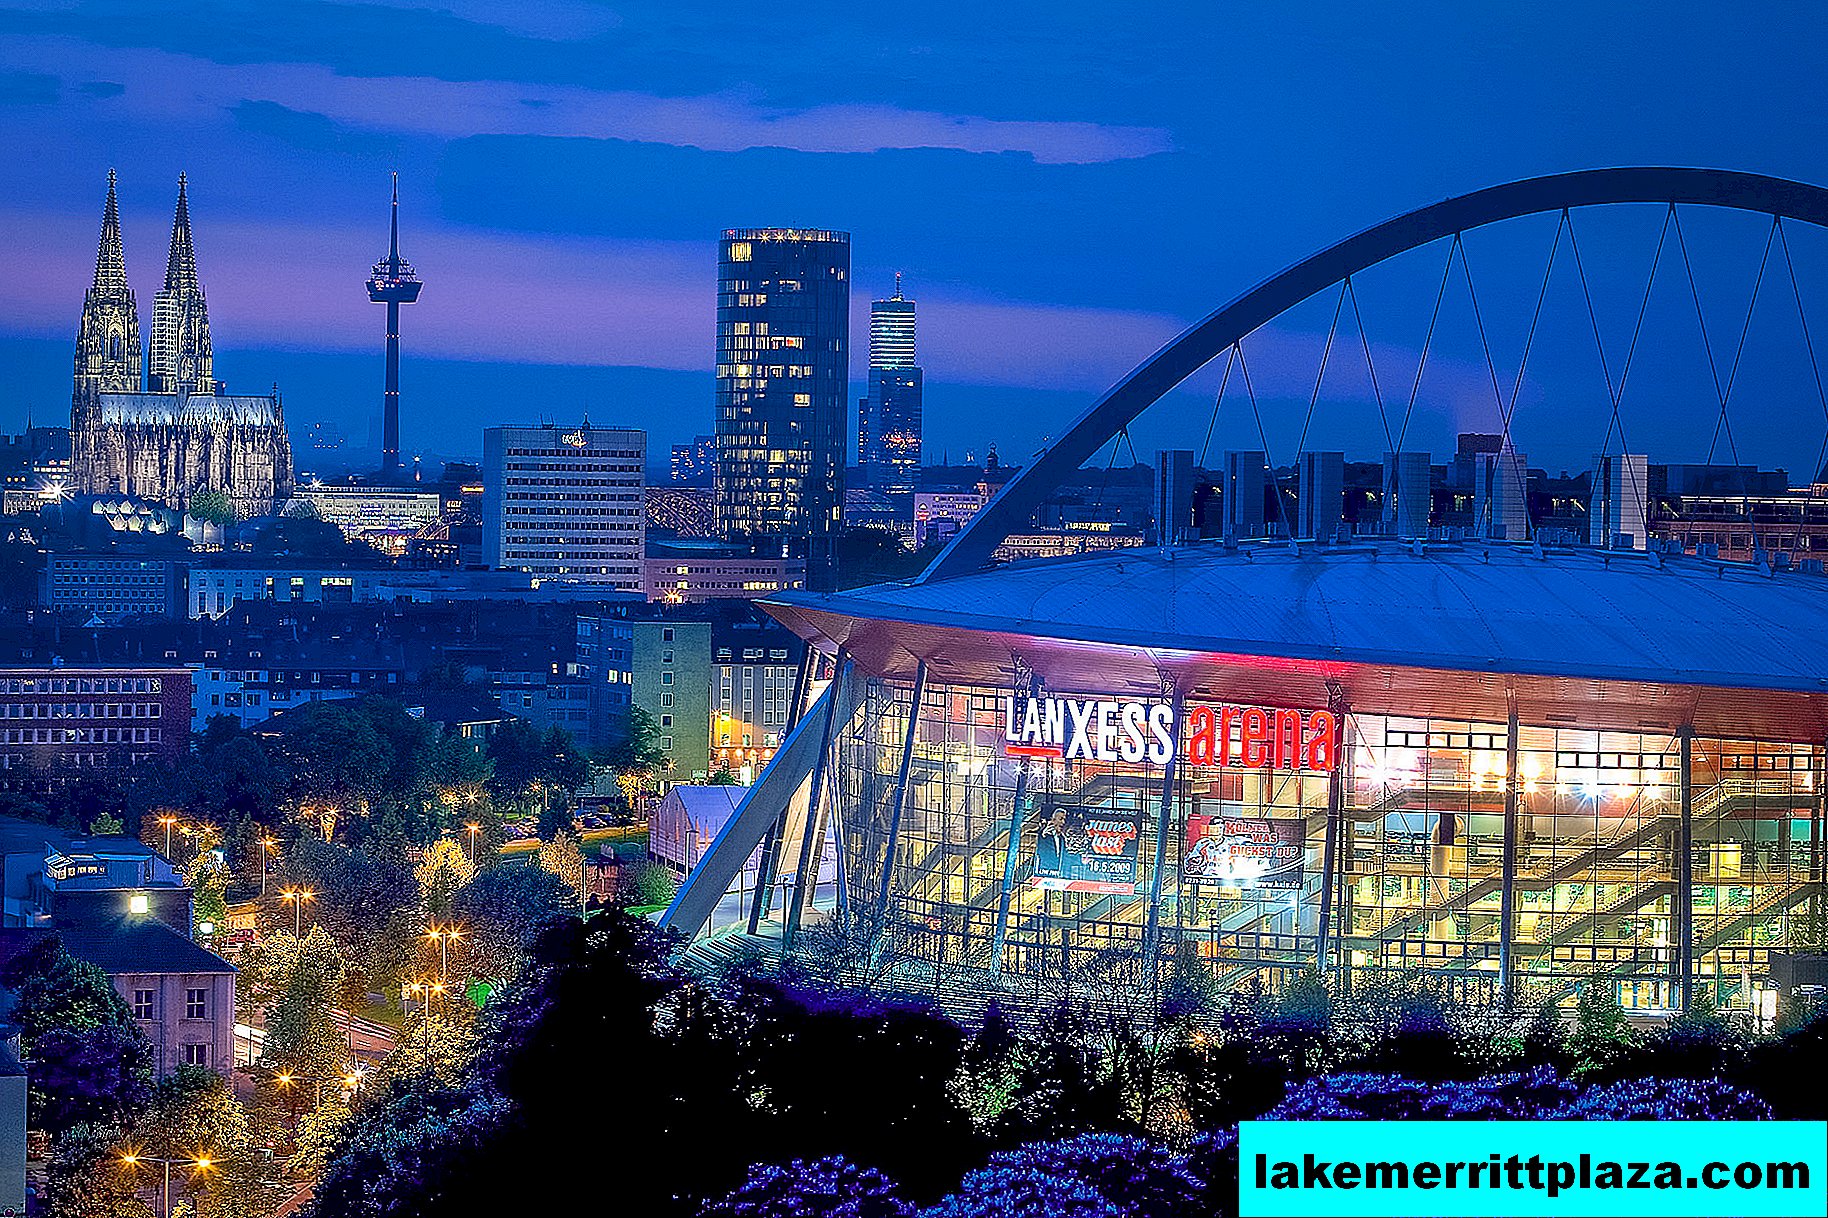 Allemagne: Lanxess Arena